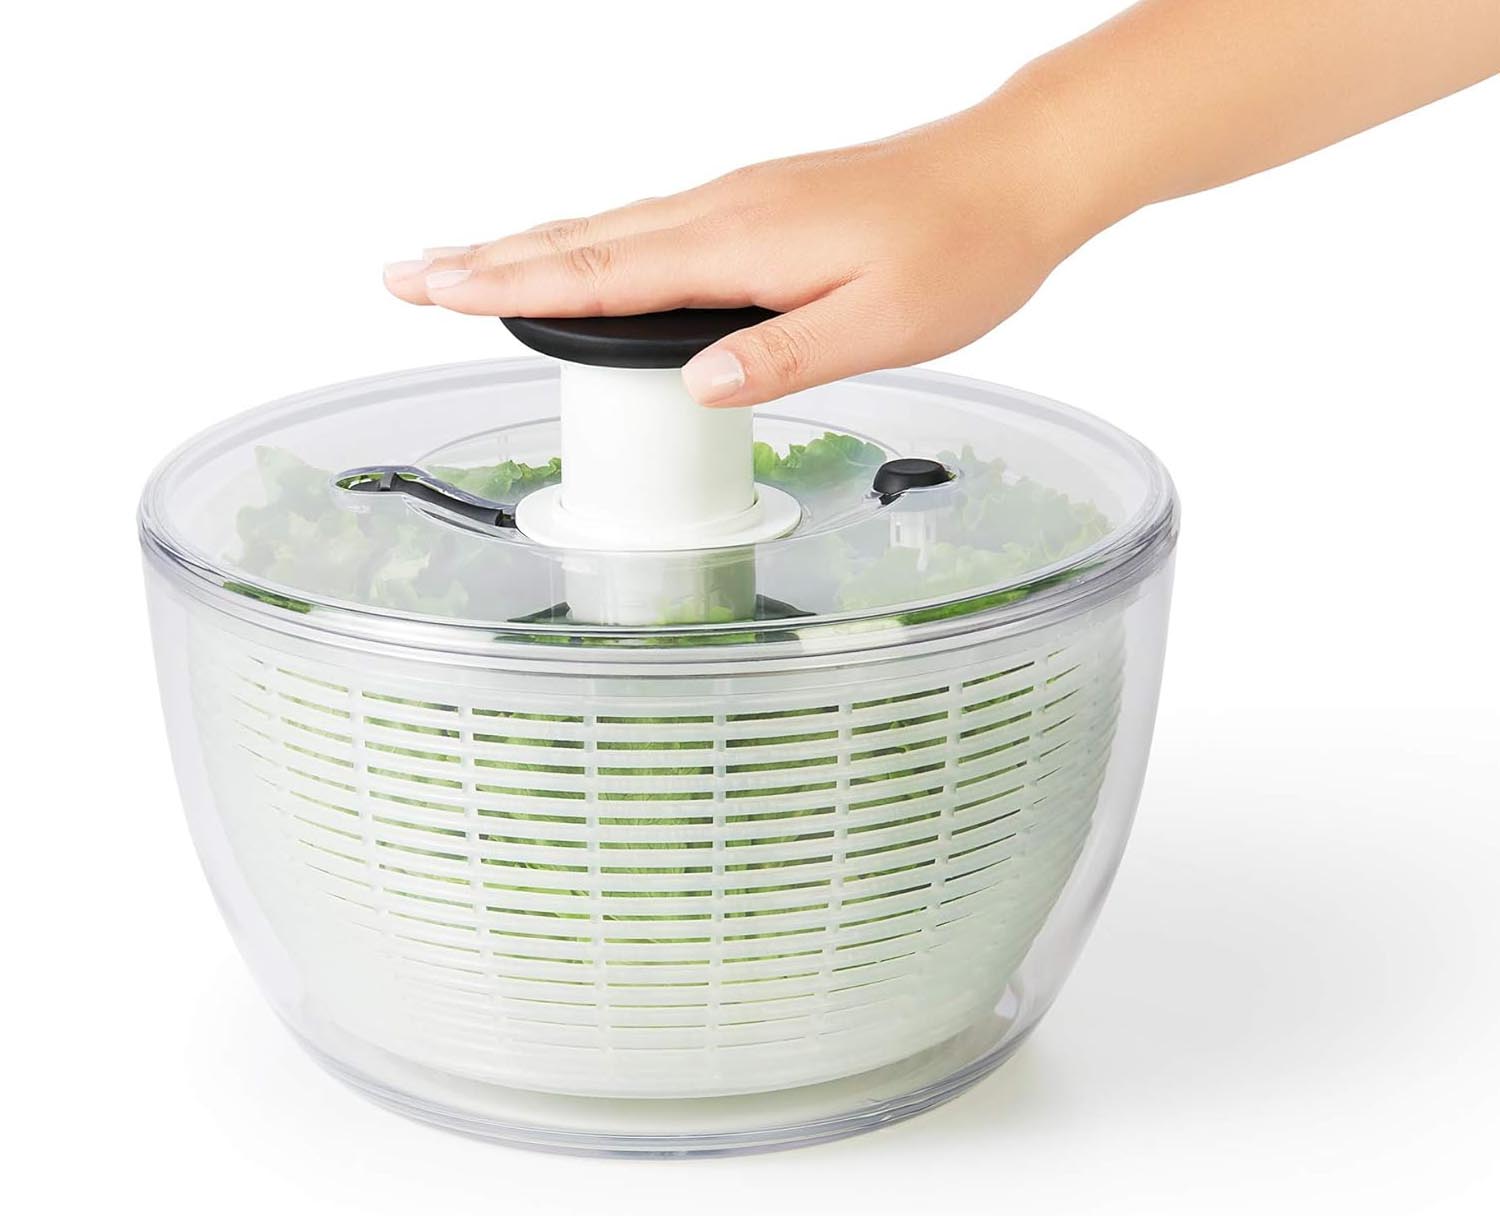 The Most Useful Gadgets for the Home Option OXO Good Grips Large Salad Spinner